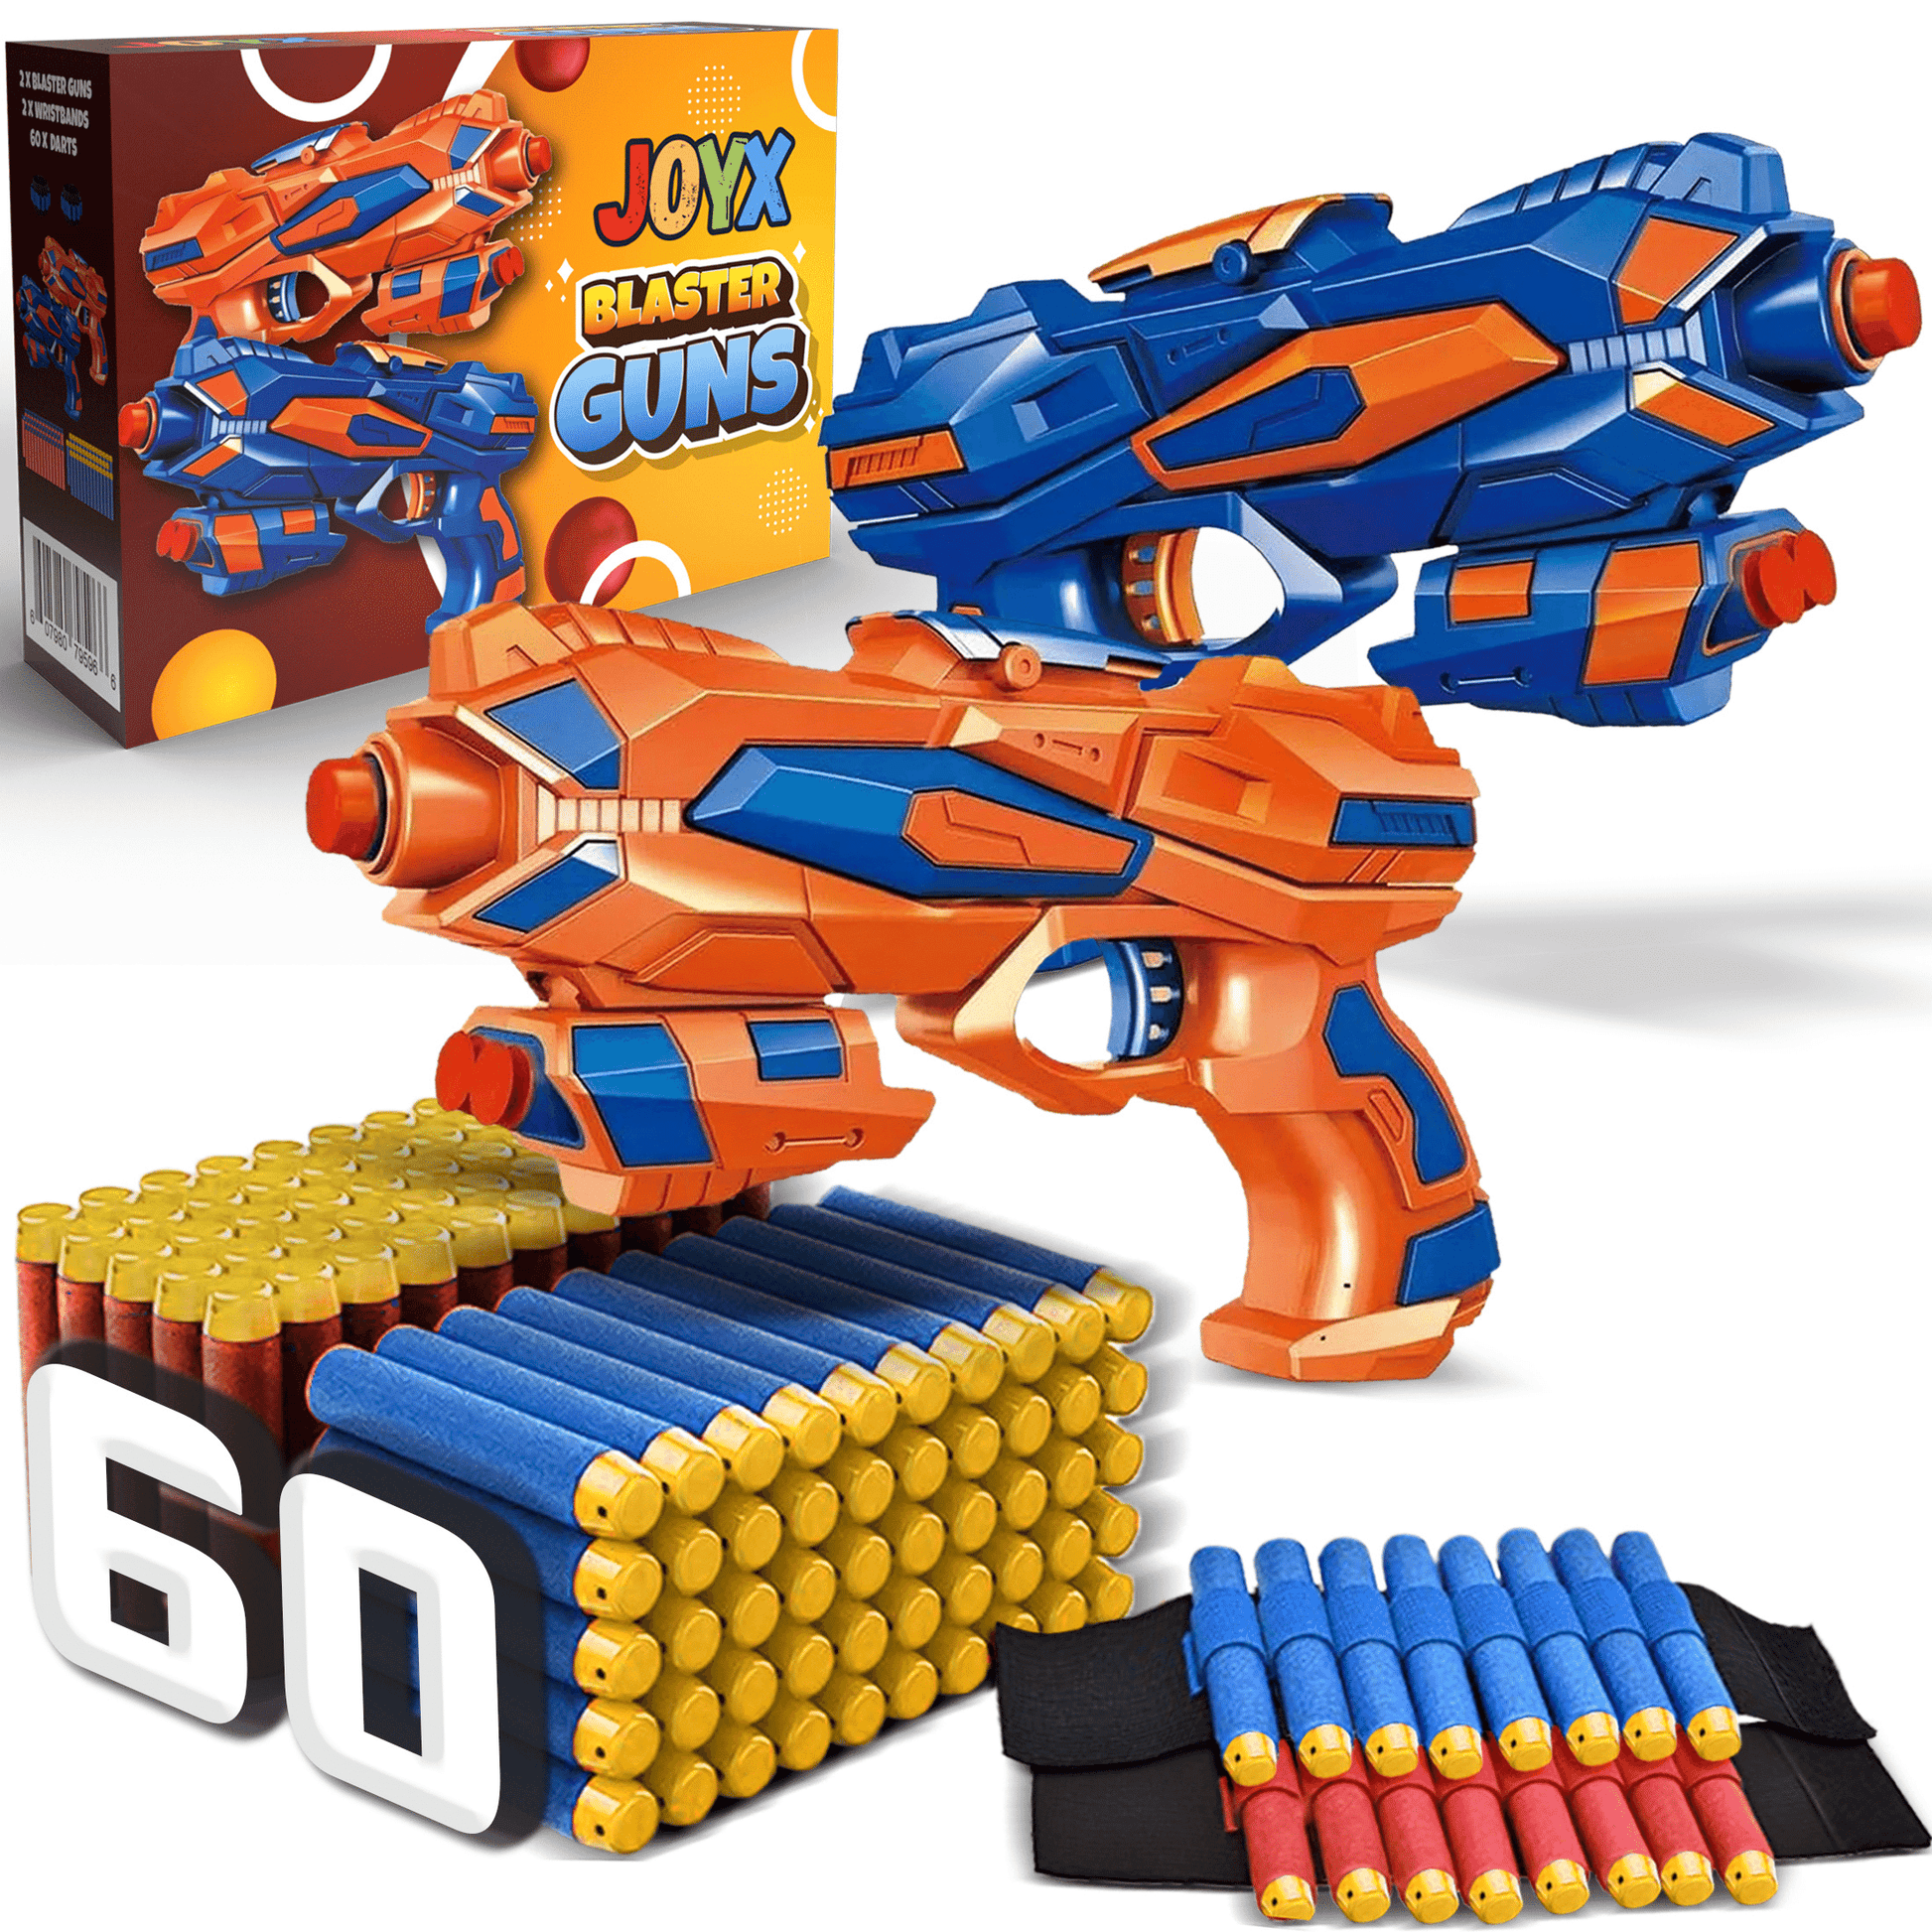 JoyX 2 Pack Blaster Guns in orange and blue with multiple foam dart packs and digital score counters on a white background."